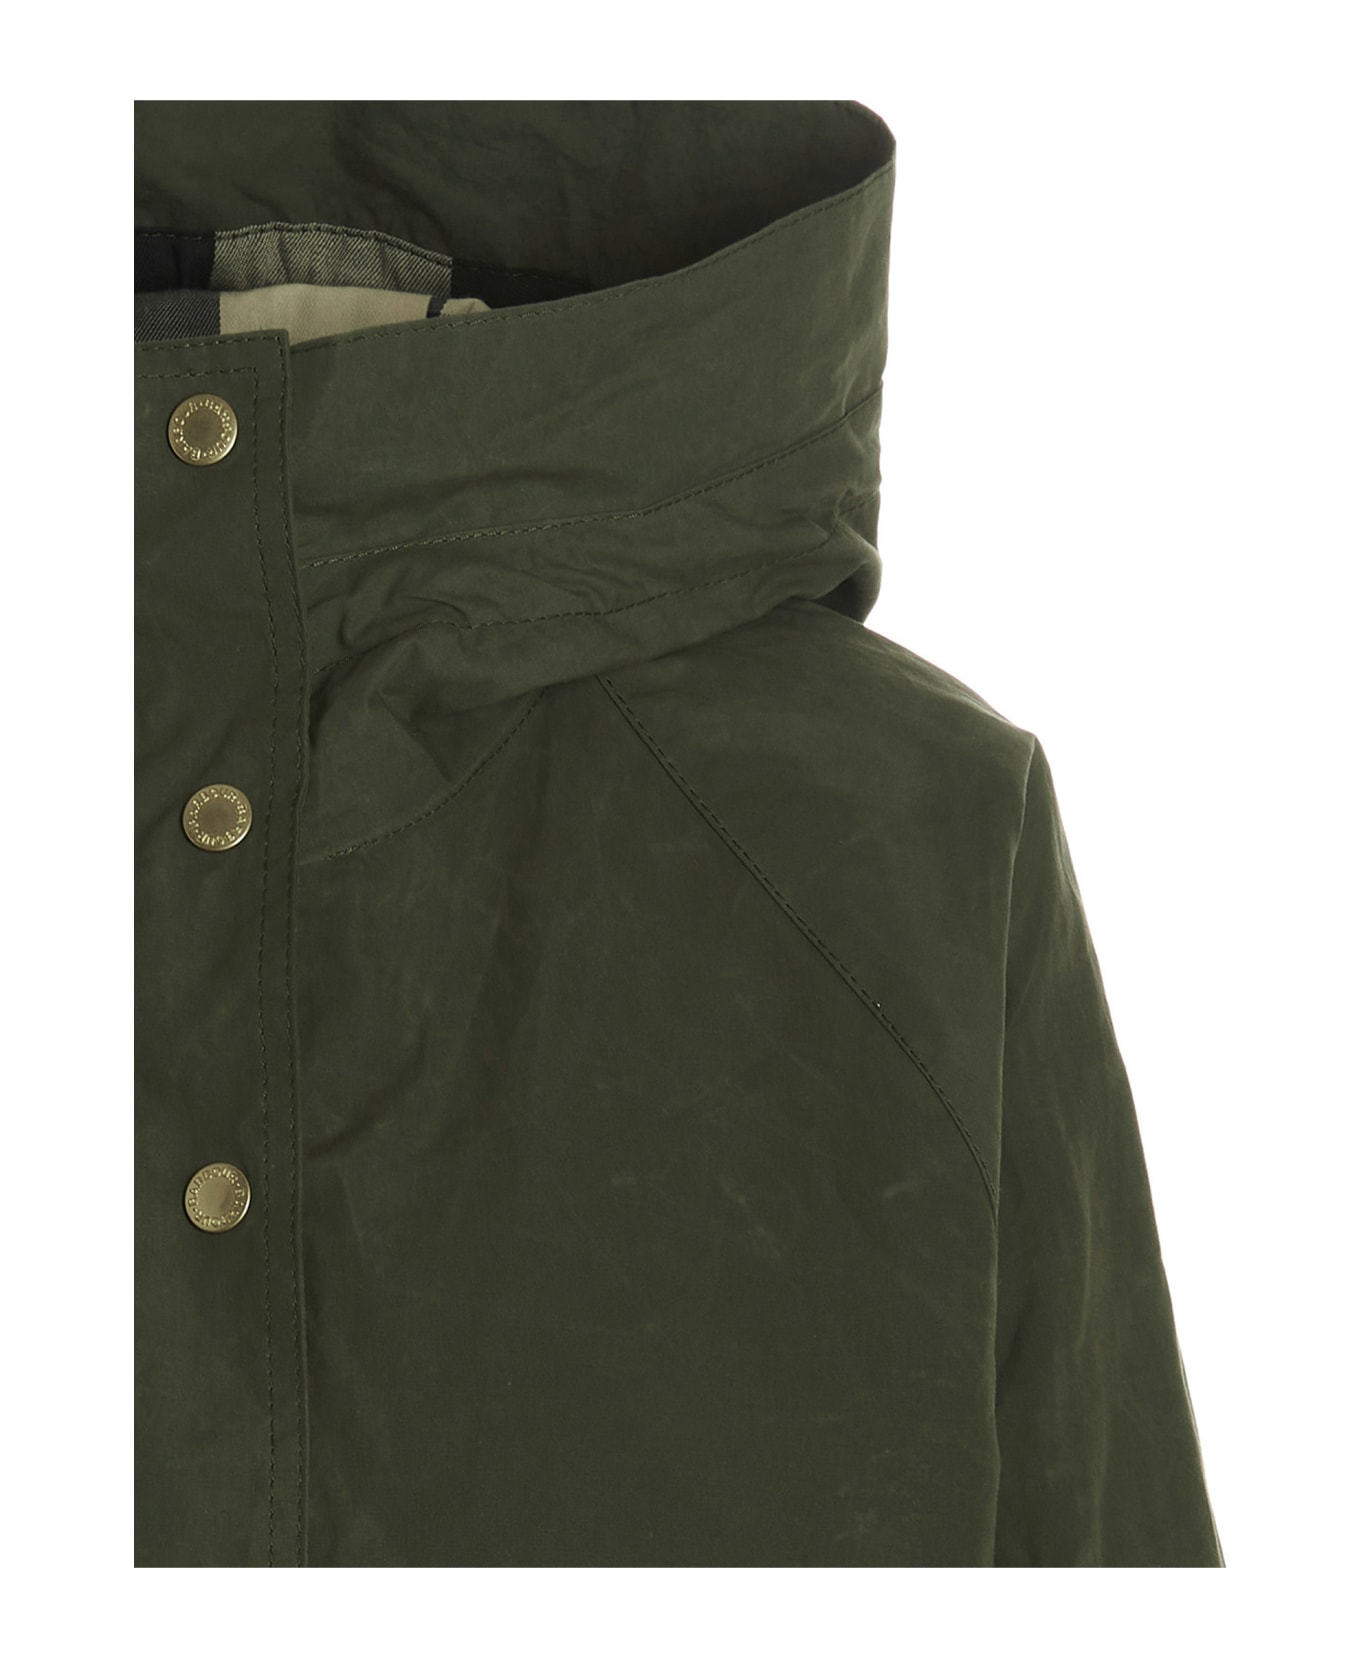 Barbour 'nith' Jacket - Green